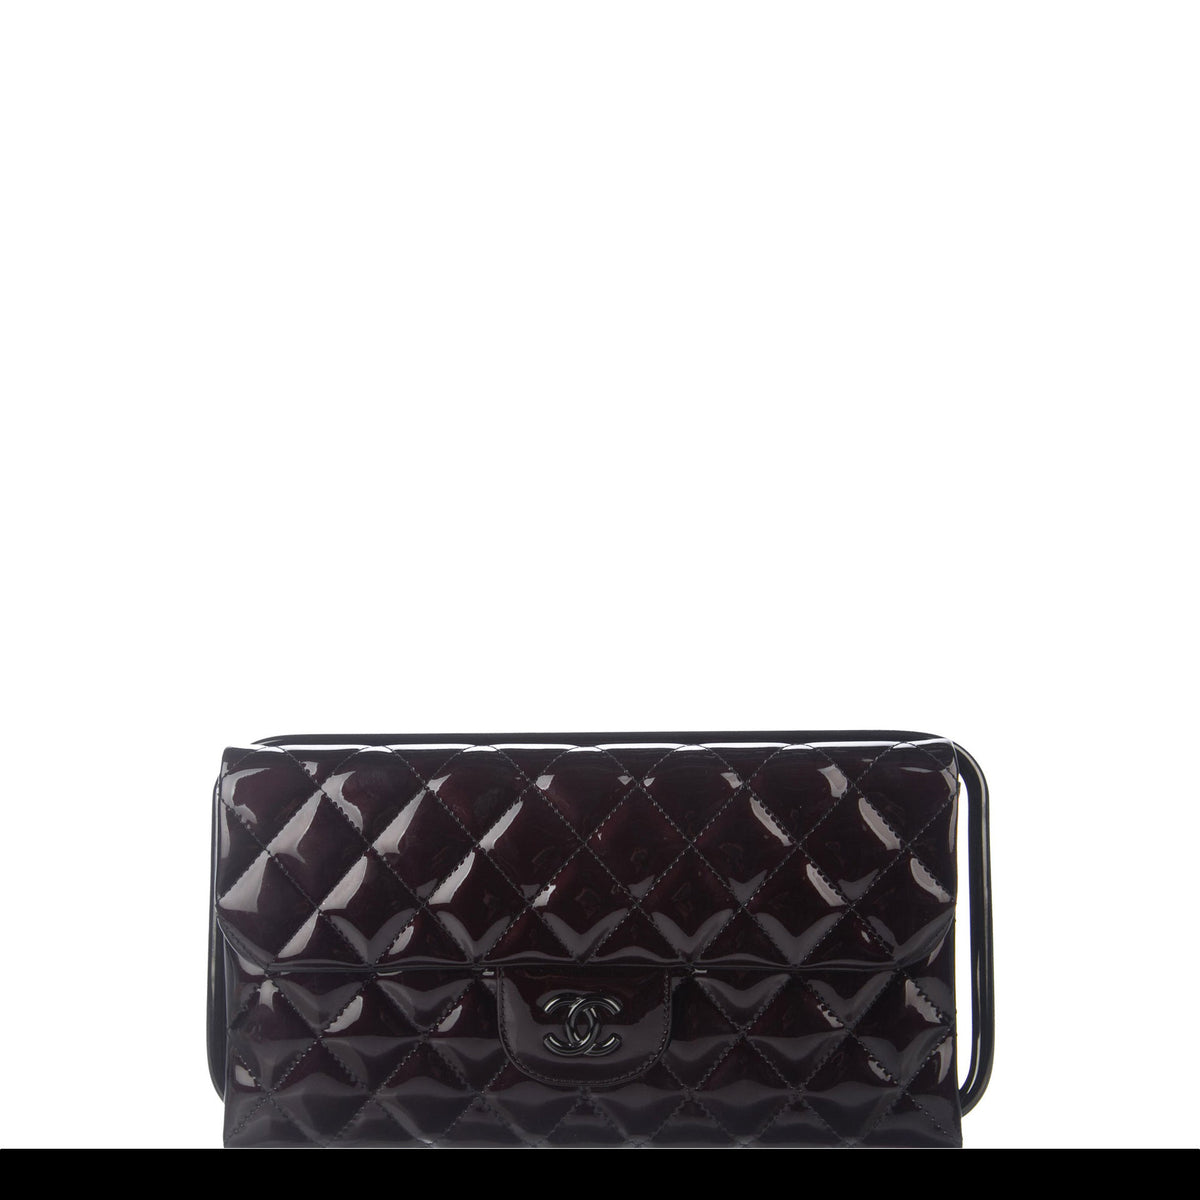 Chanel Black Patent Mademoiselle Lock Convertible Clutch Bag